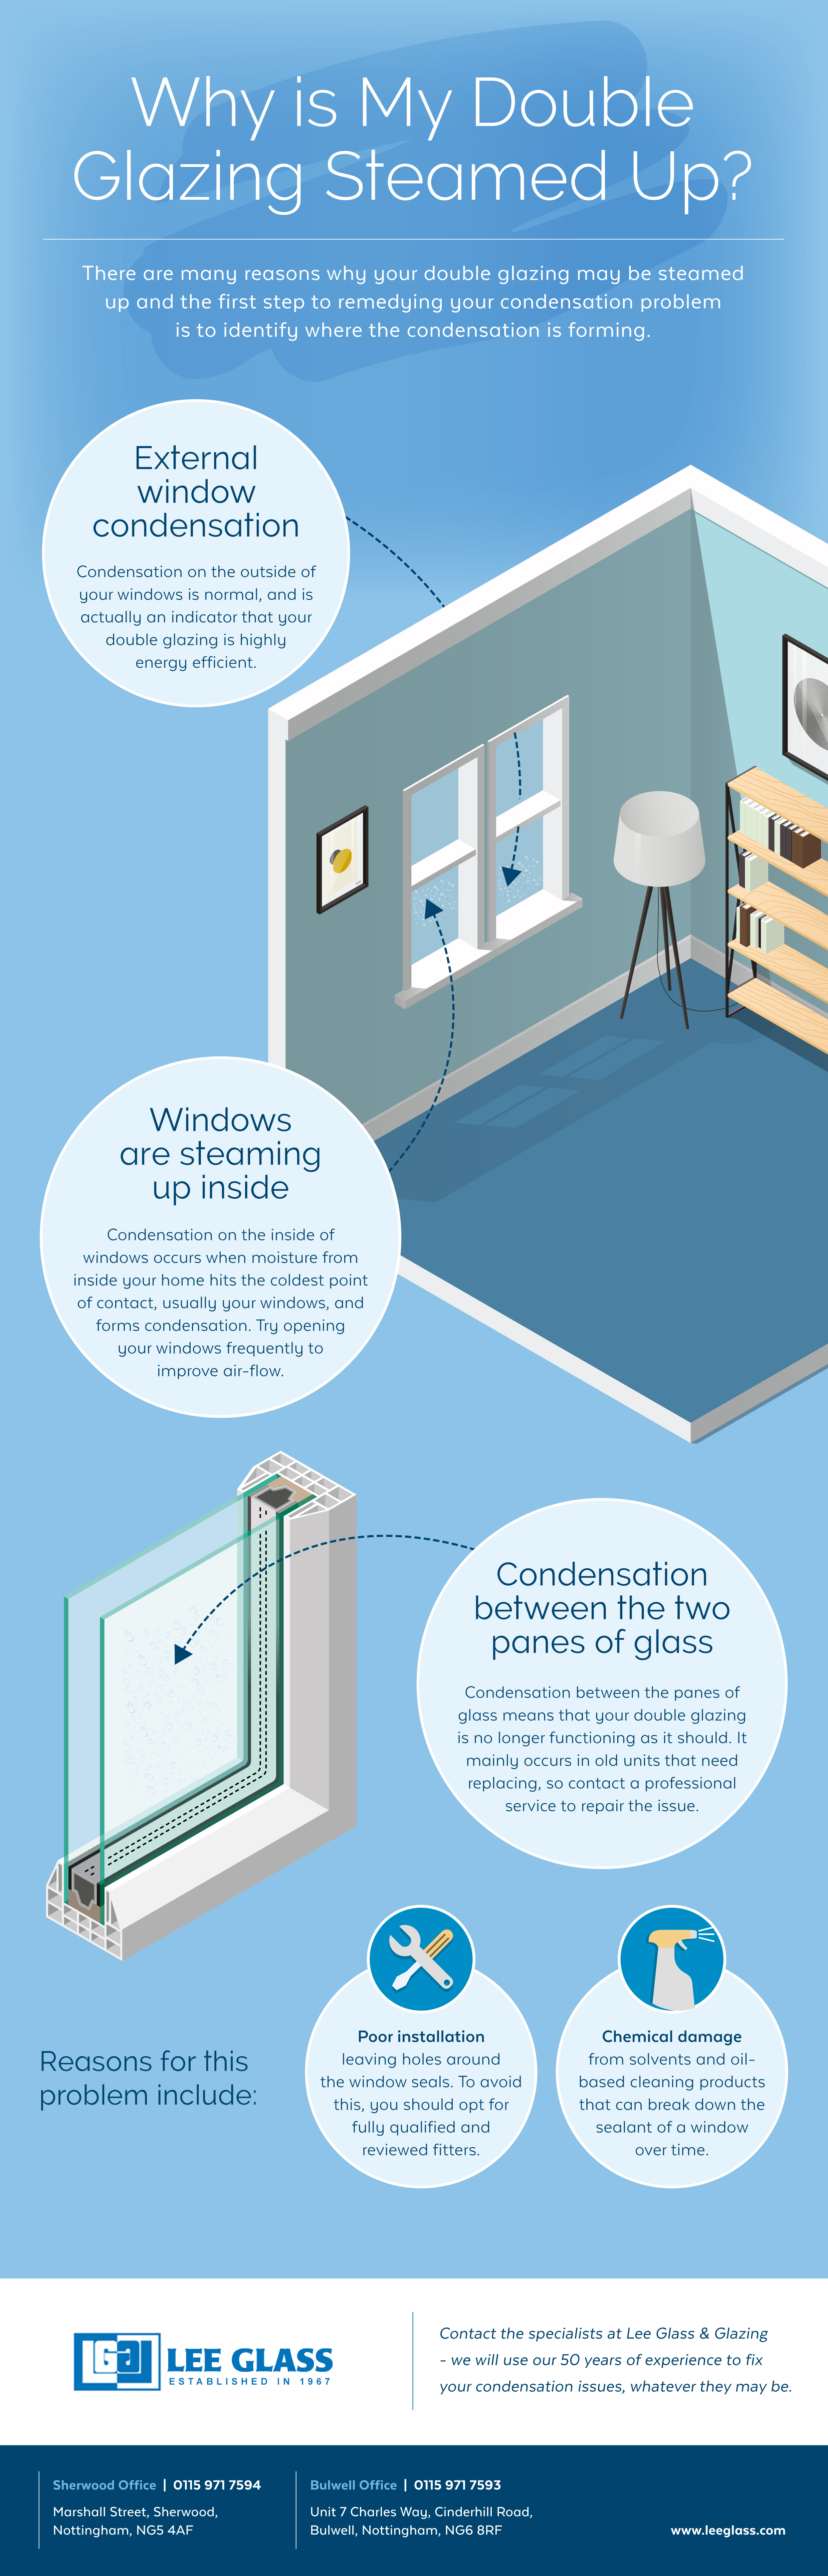 Why Is My Double Glazing Steamed Up Infographic Lee Glass And Glazing